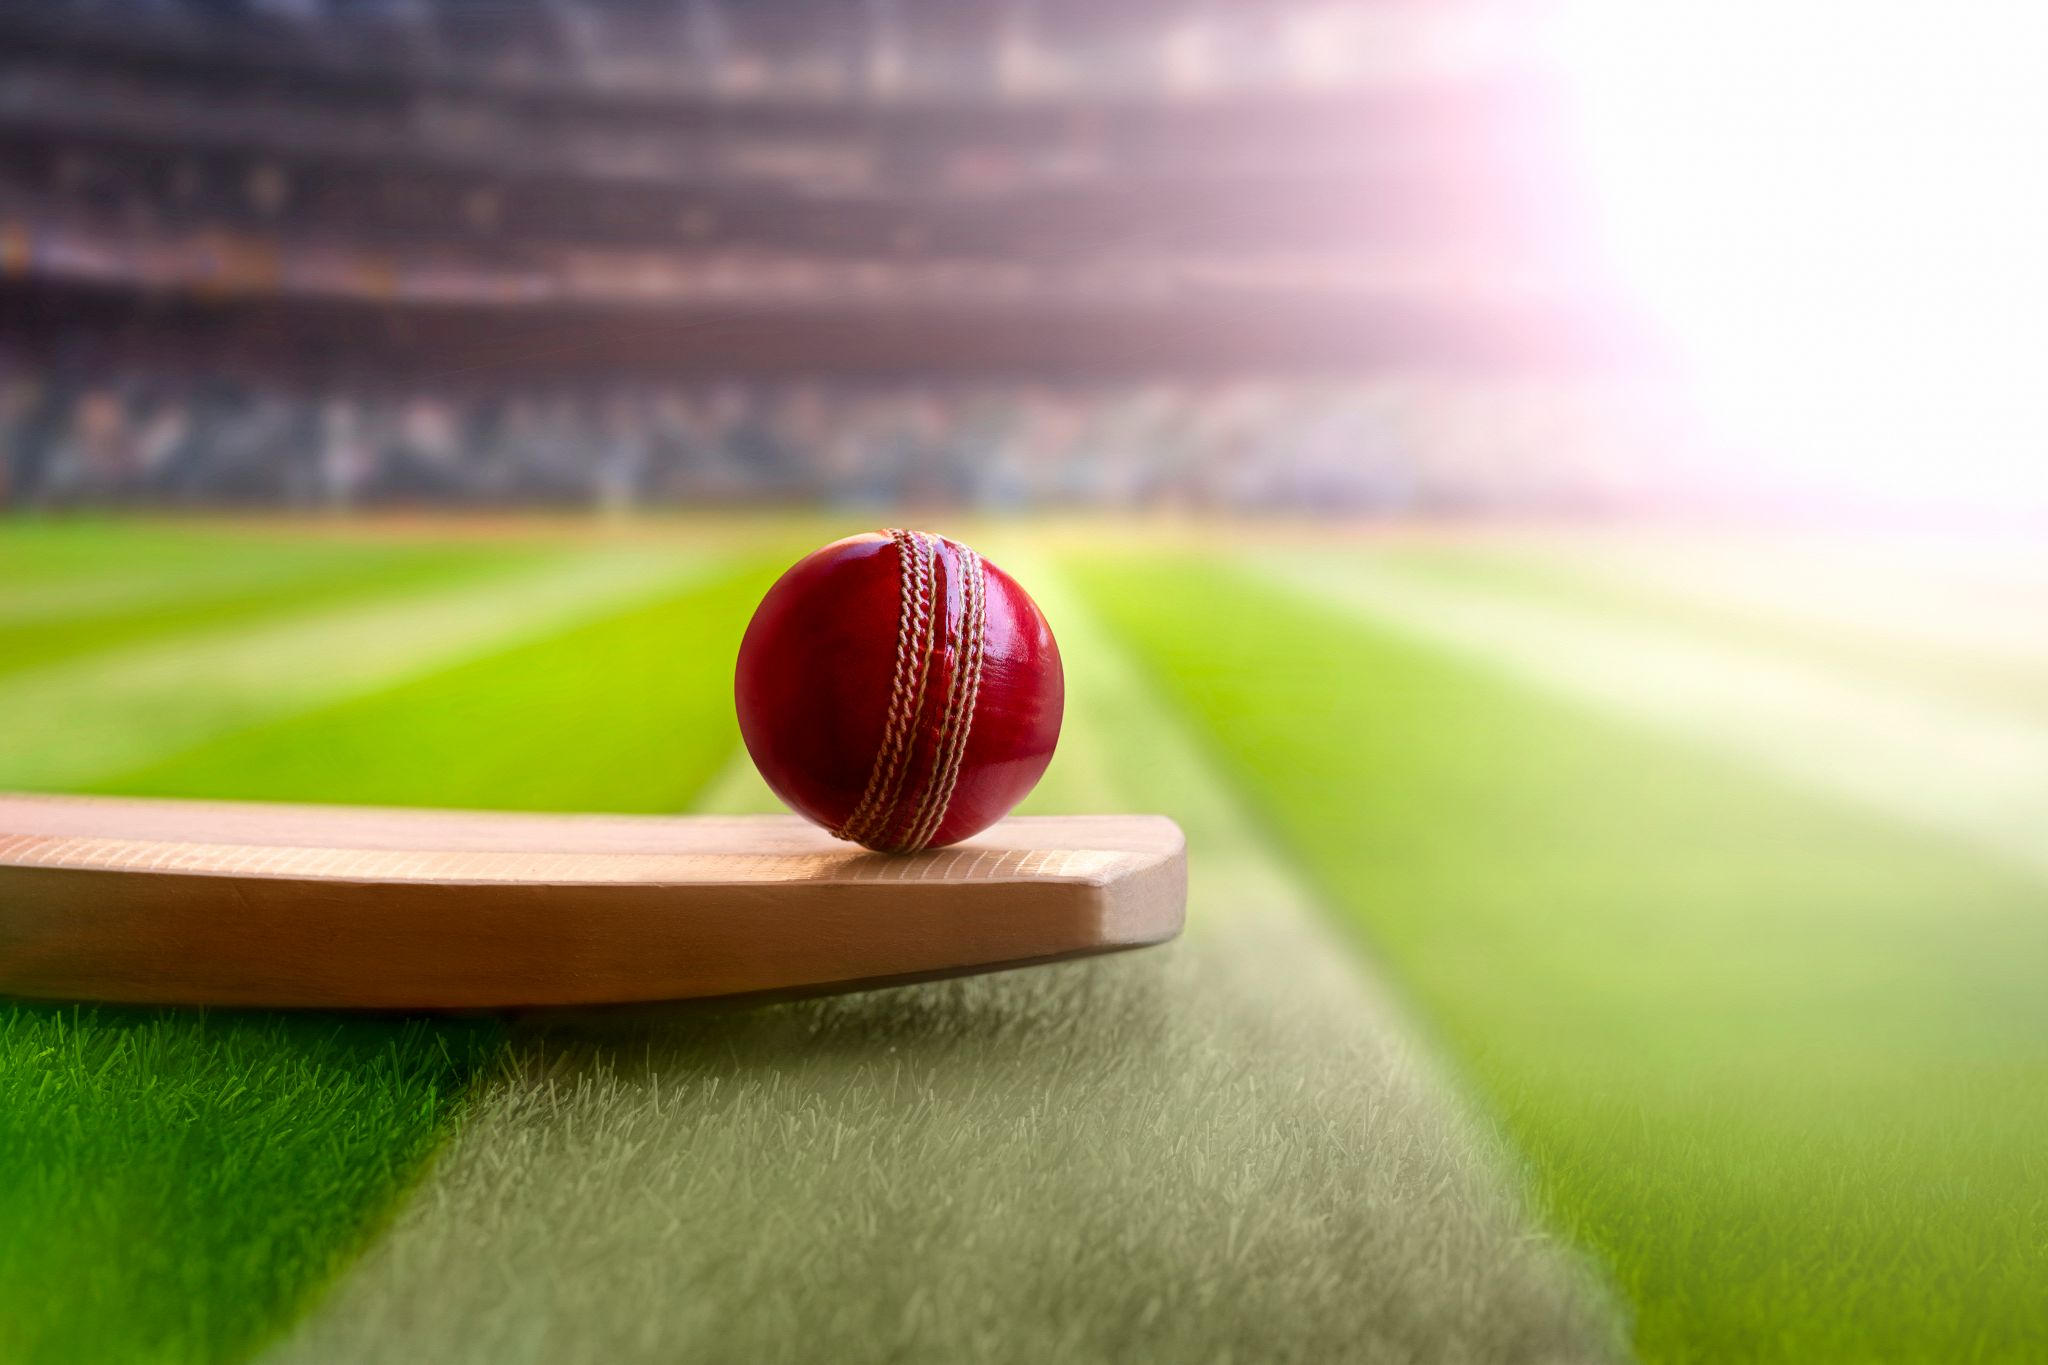 A cricket ball resting on the bat